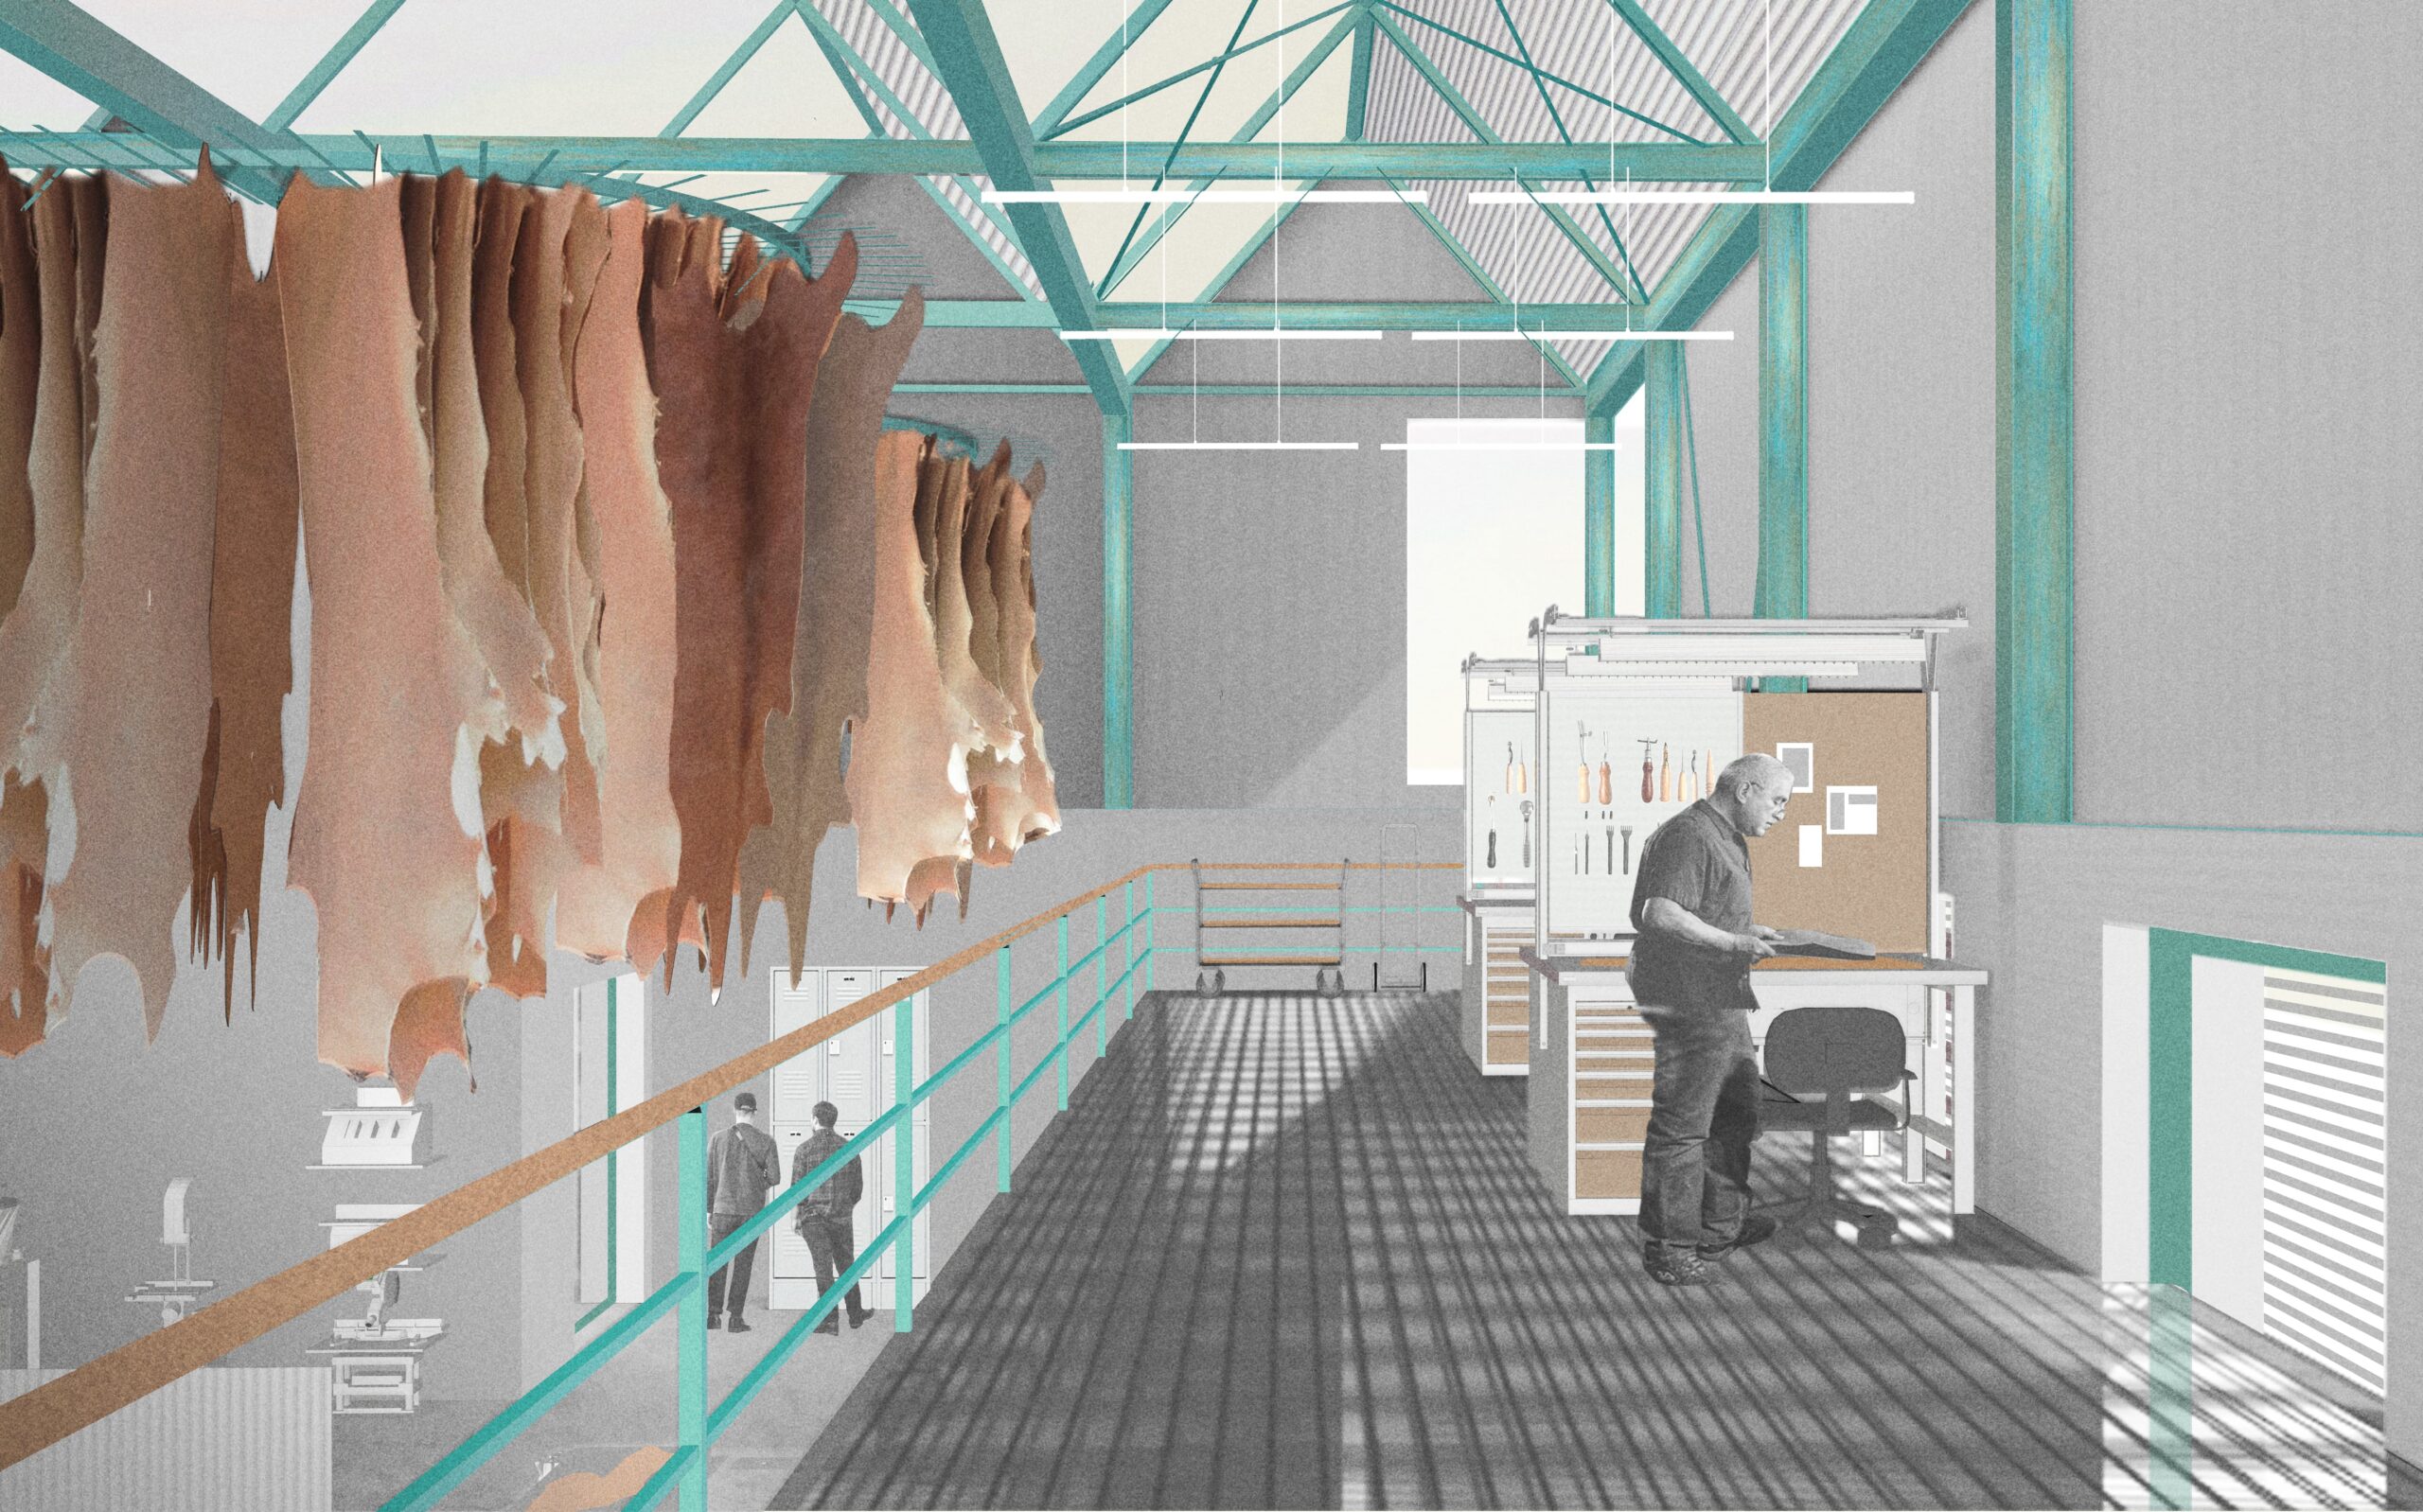 a render illustrating the process of leatherworks inside the manufacturing hall. there is leather hanging to the left of the image  and the structure is emphasised in teal